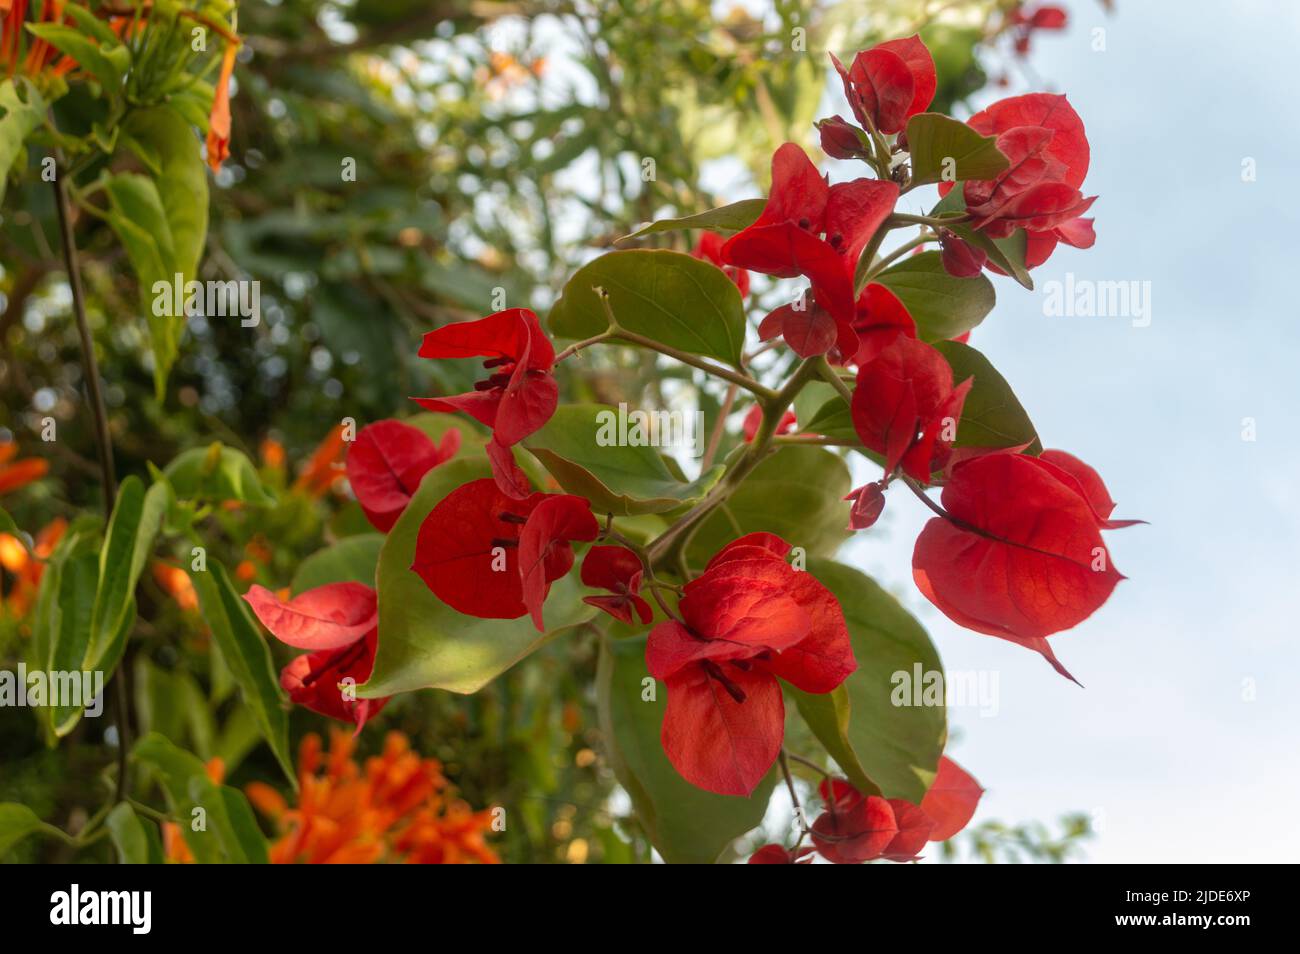 plant with red leaves Stock Photo